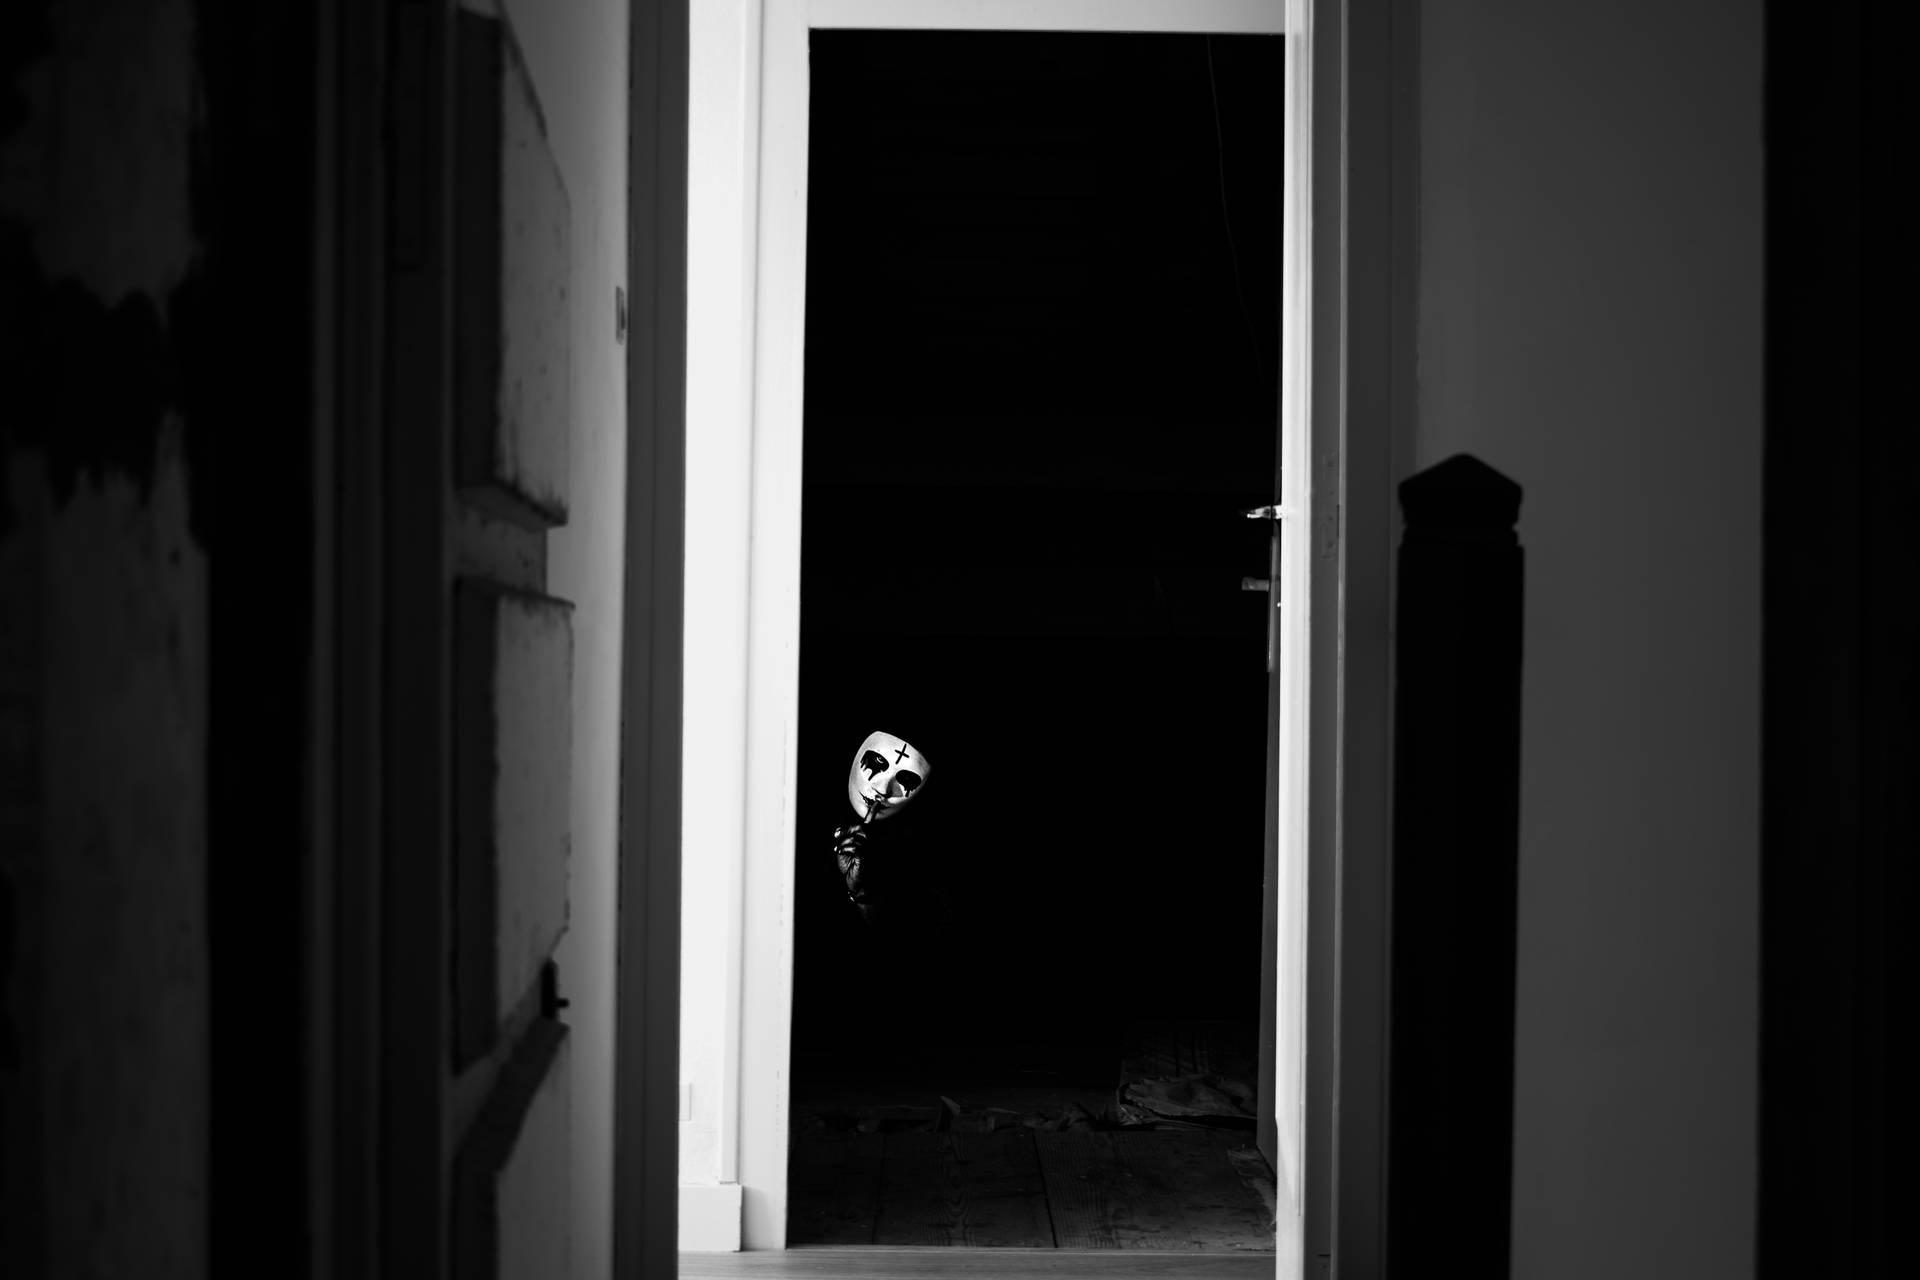 White-faced Paranormal Door Ghost